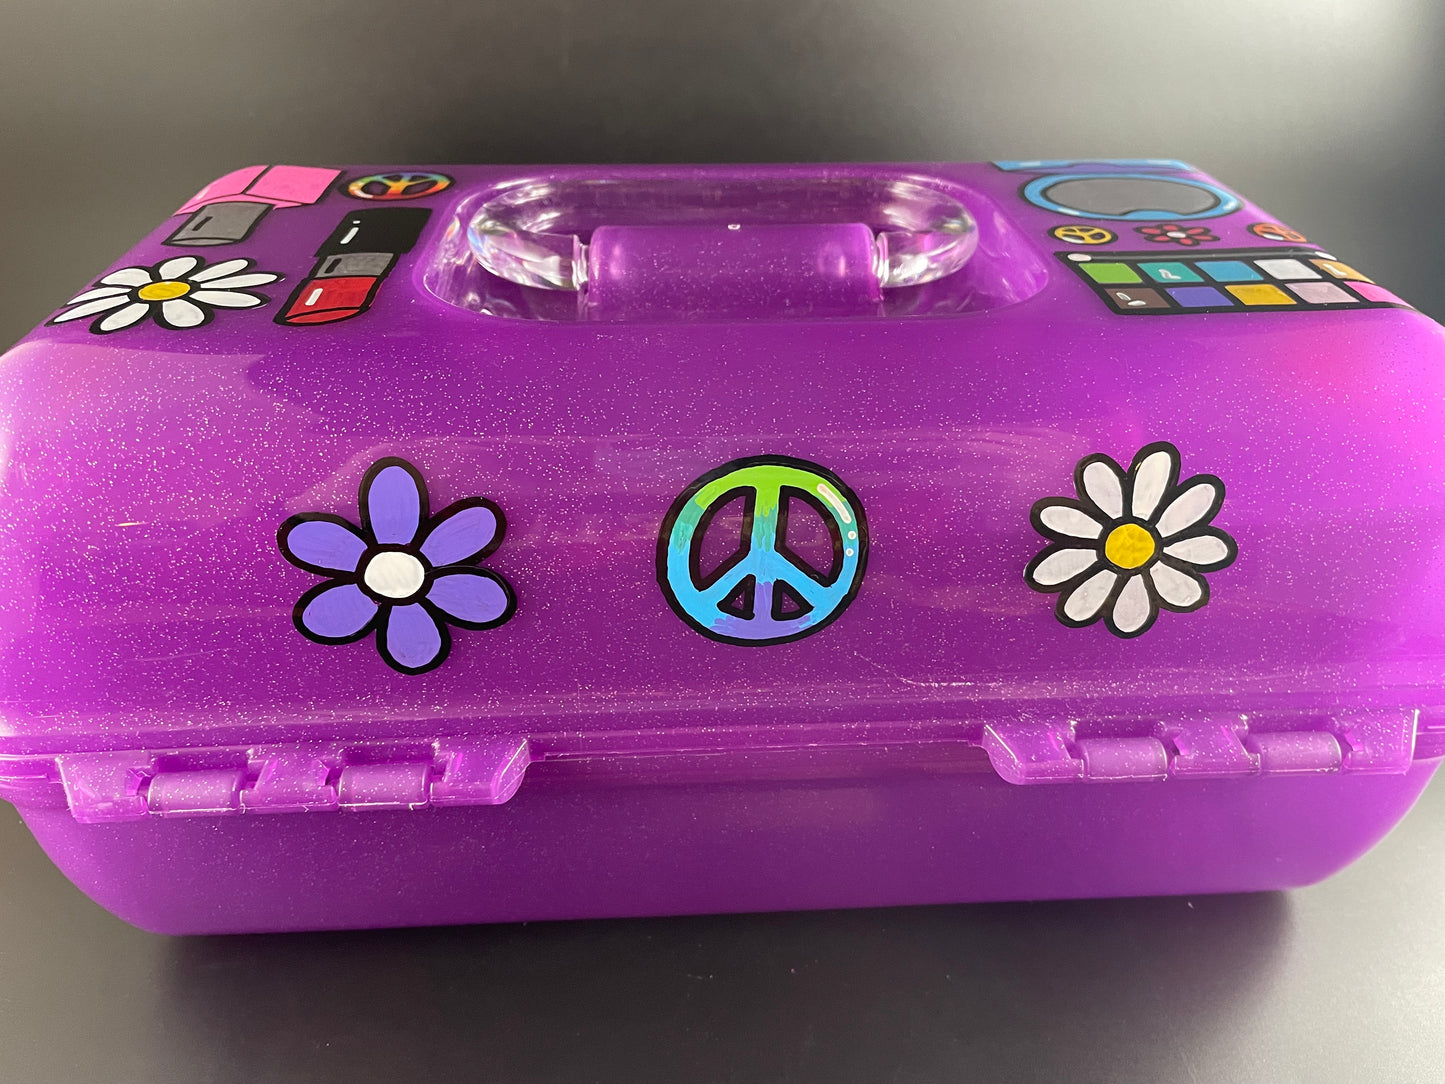 "Simmy" hand-painted personalized caboodle